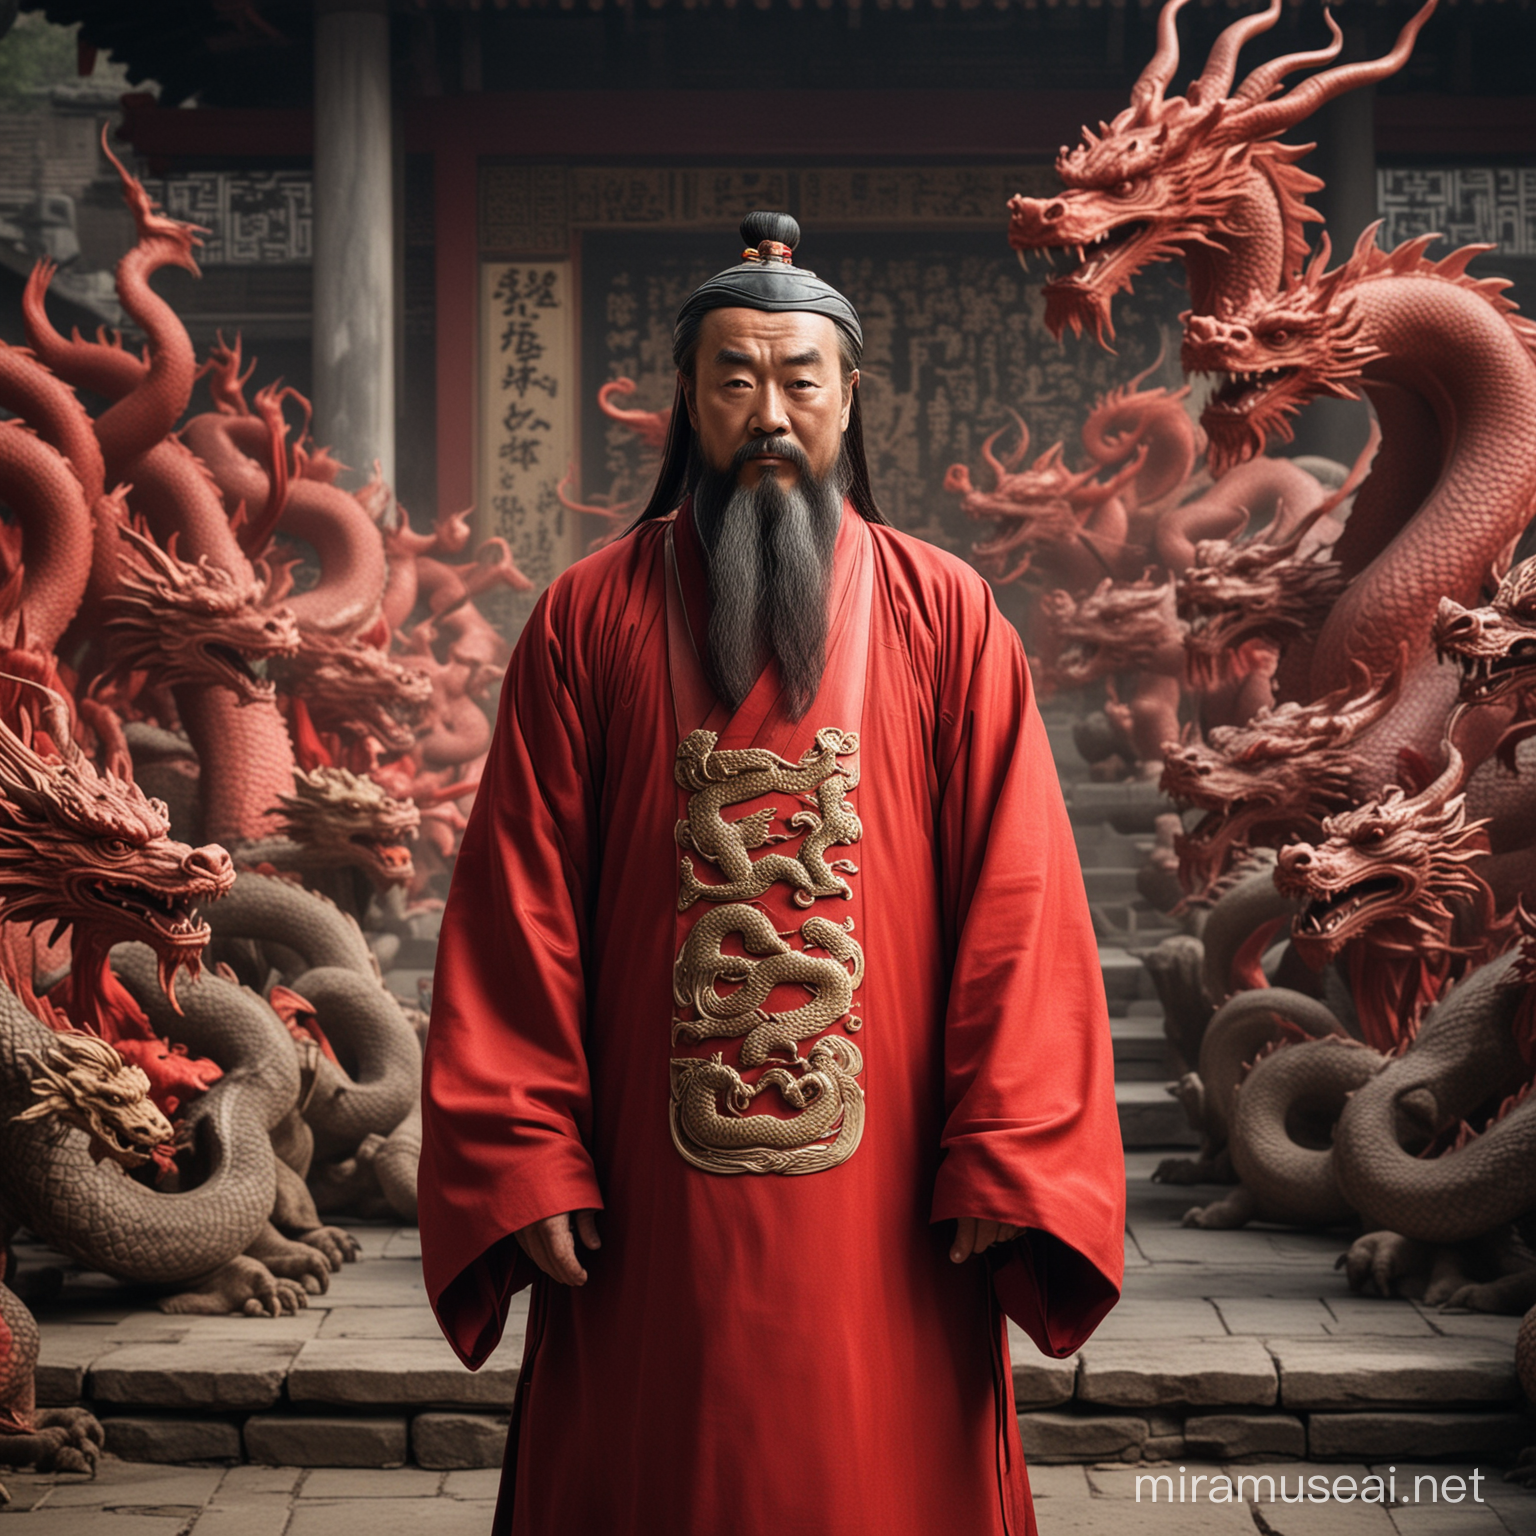 Confucius stands straight, in red clothes with dragons, looking at the camera